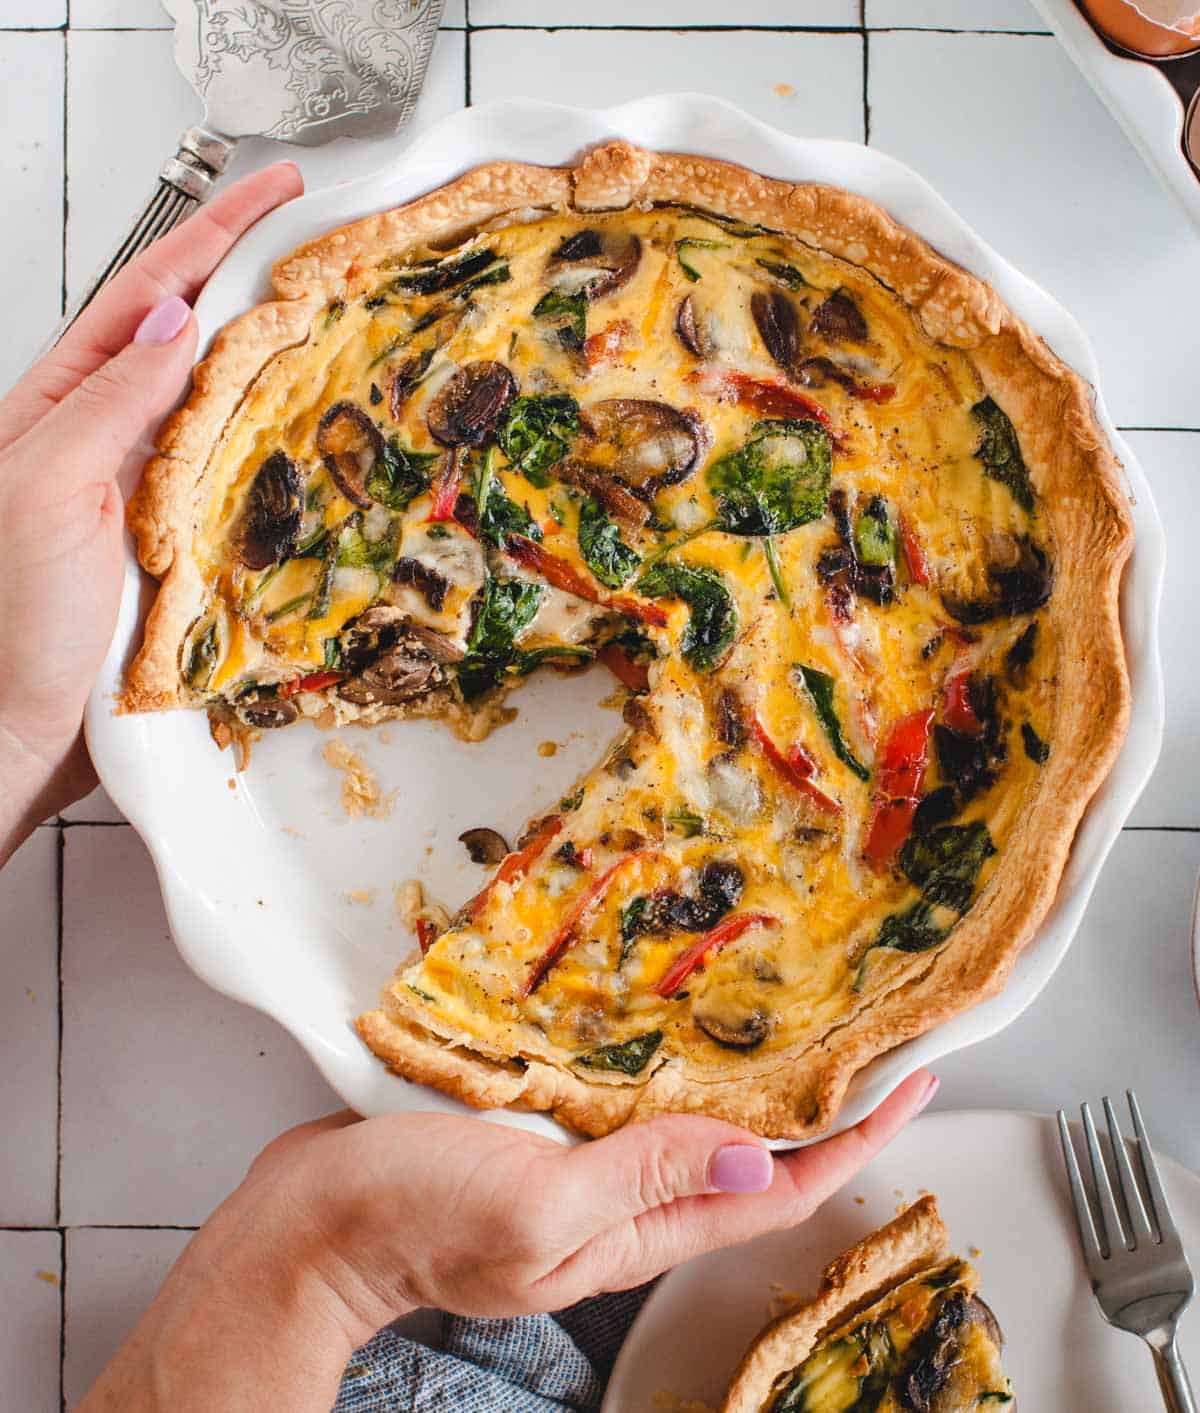 hands setting a quiche down on a tabletop